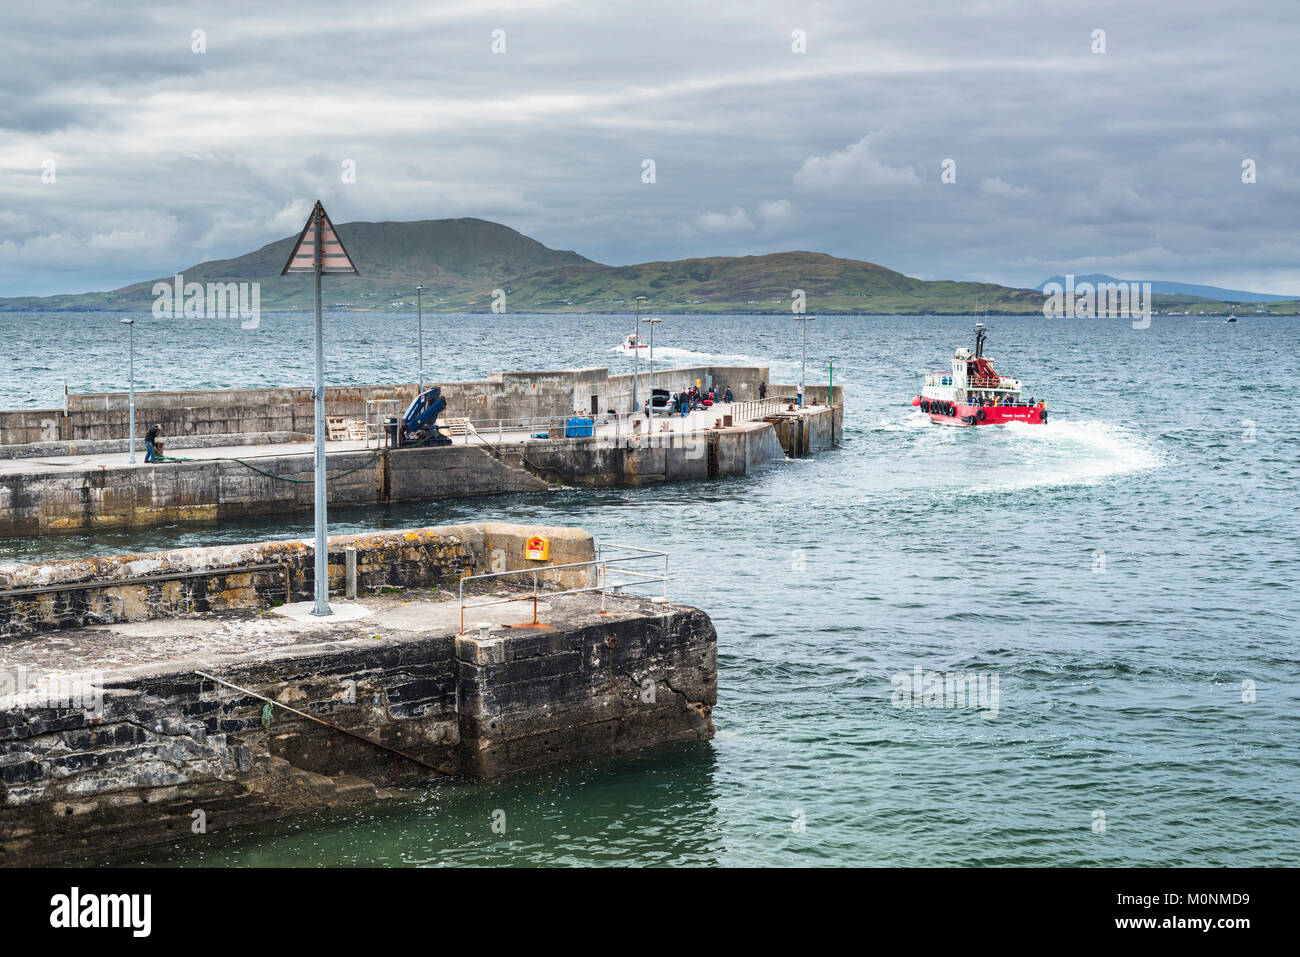 Ferry boats to Clare Island and Inishturk Island leave from Roonagh Pier, west of Louisburg, County Mayo, Ireland Stock Photo